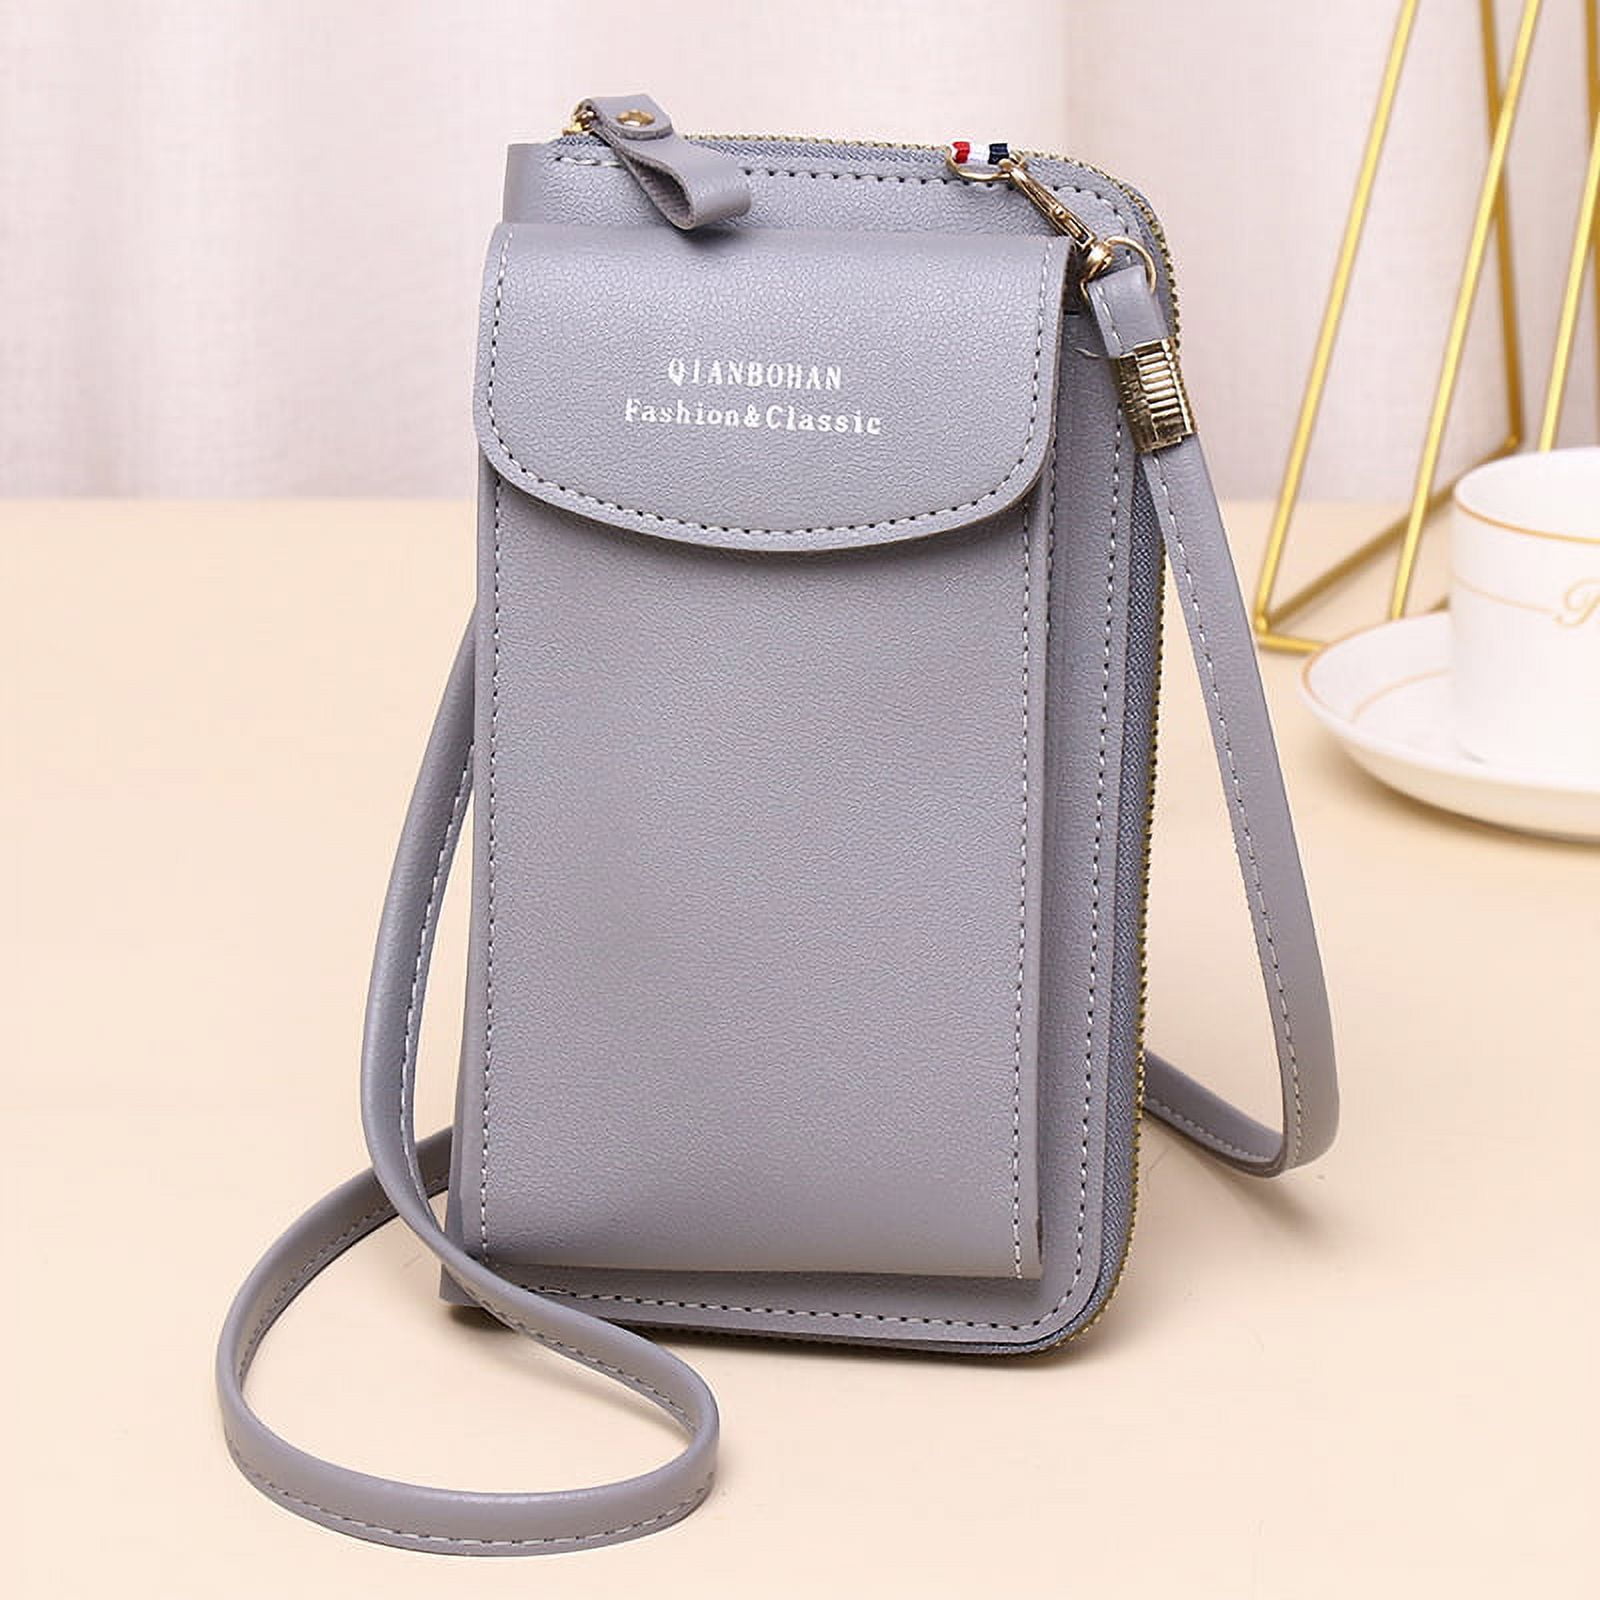 Buy GUSTAVE® Pink Mini Wallet Shoulder Small Crossbody Phone Bag for Women  with Earphone Cable Hole Wallet Clutch Bag for Women at